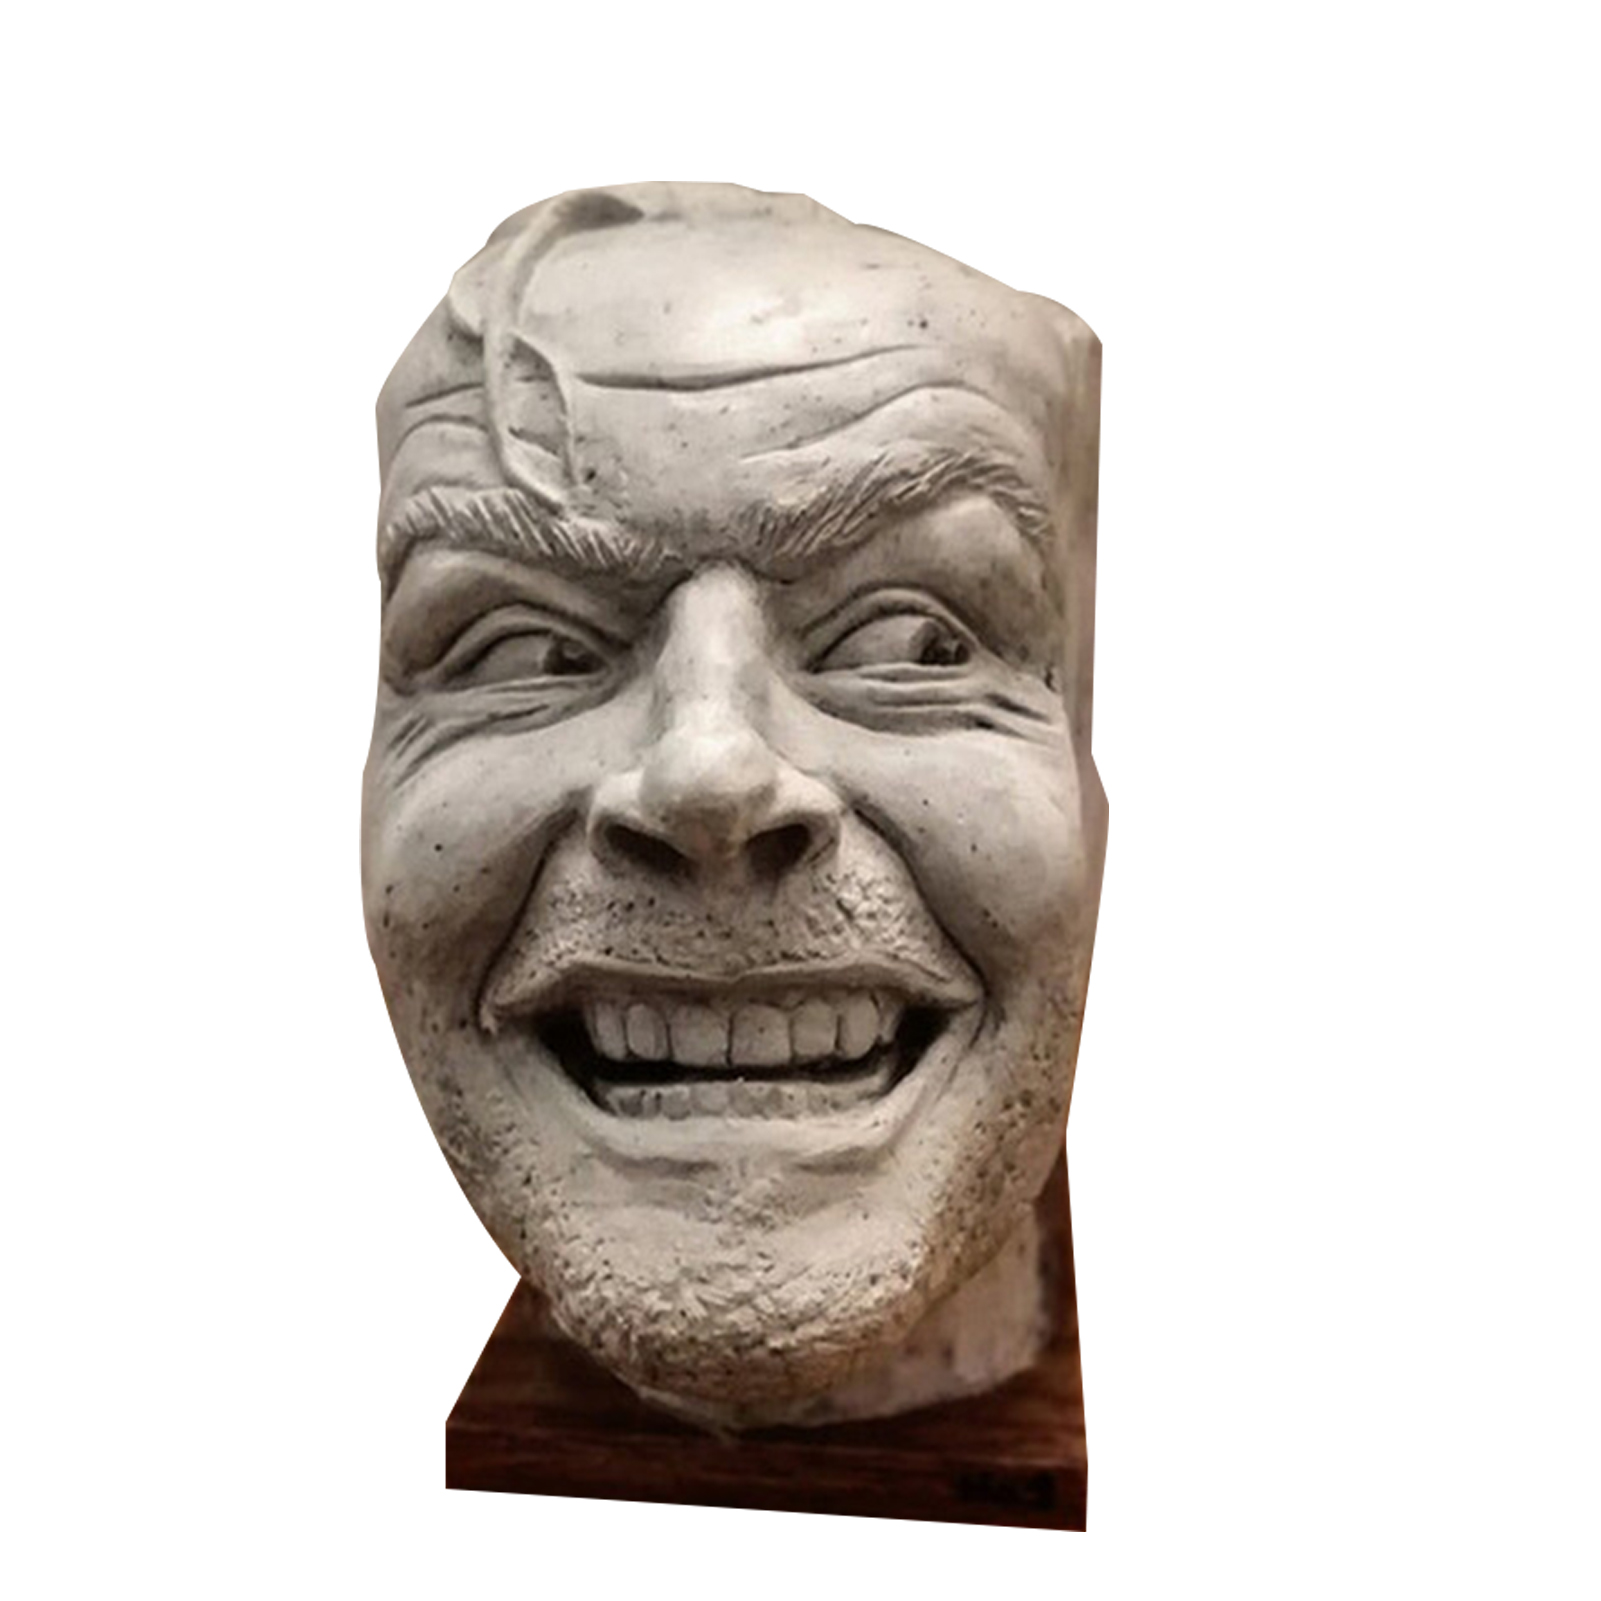 Sculpture Of The Shining Bookend Library Here?s Johnny Sculpture Resin Desktop Ornament Book Shelf Book Ends for Book Shelves Decorative Book Stopper for Office Library Home 